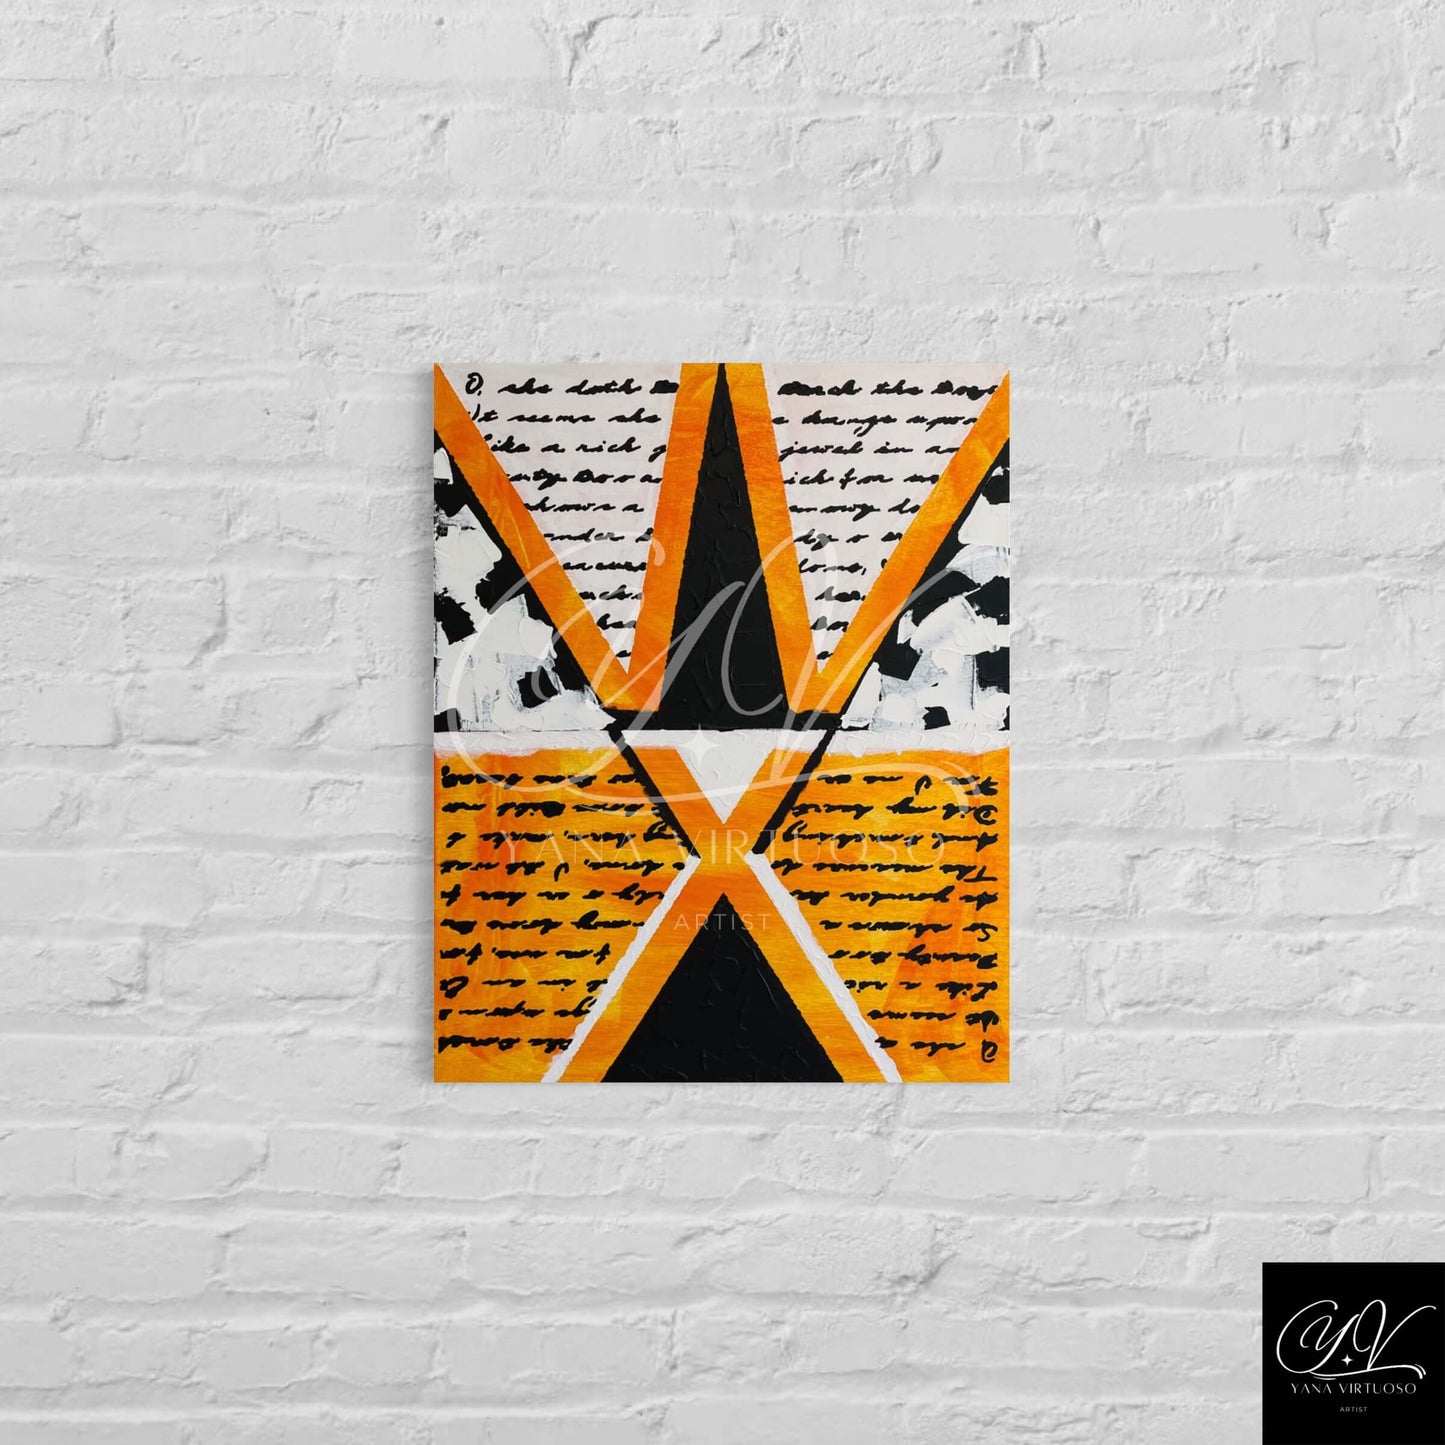 Medium shot of the "Unfinished Story" painting hanging on the wall, showcasing the interplay of orange and white colors with black elements.